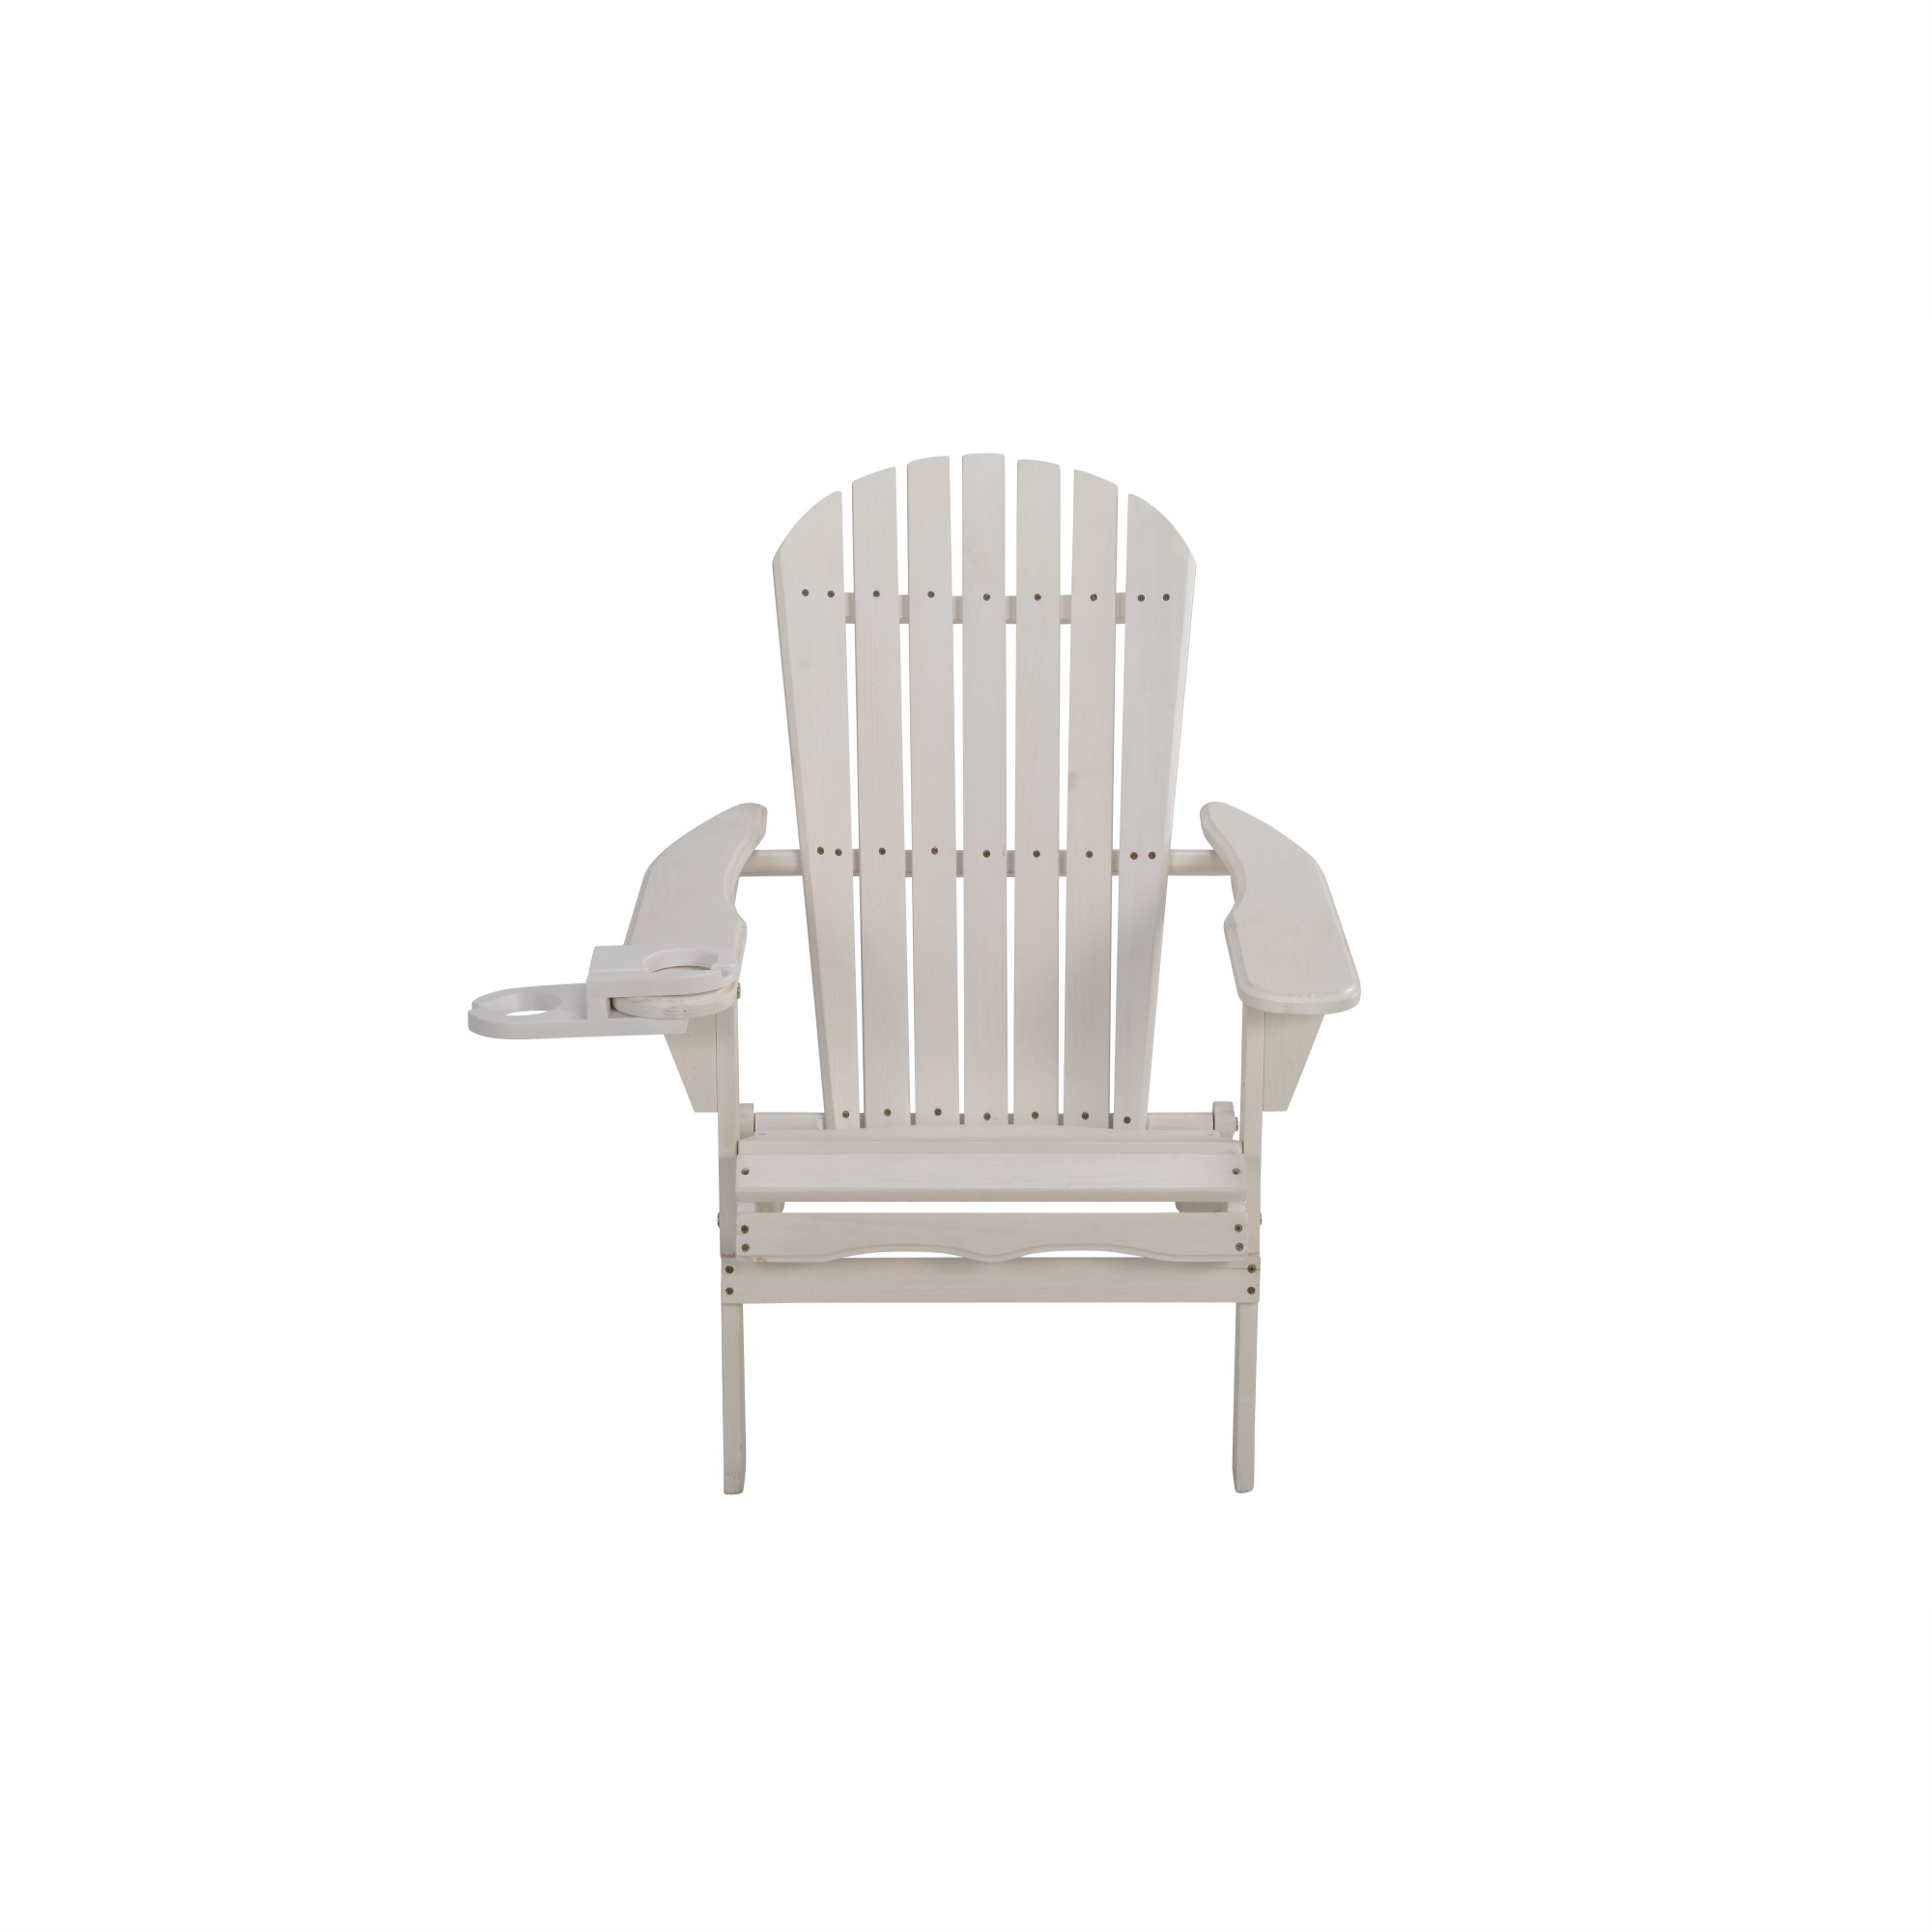 W Unlimited  33.75 x 33 x 27.75 in. 2 Foldable Chair with Ottoman & 1 End Table, White - image 2 of 2